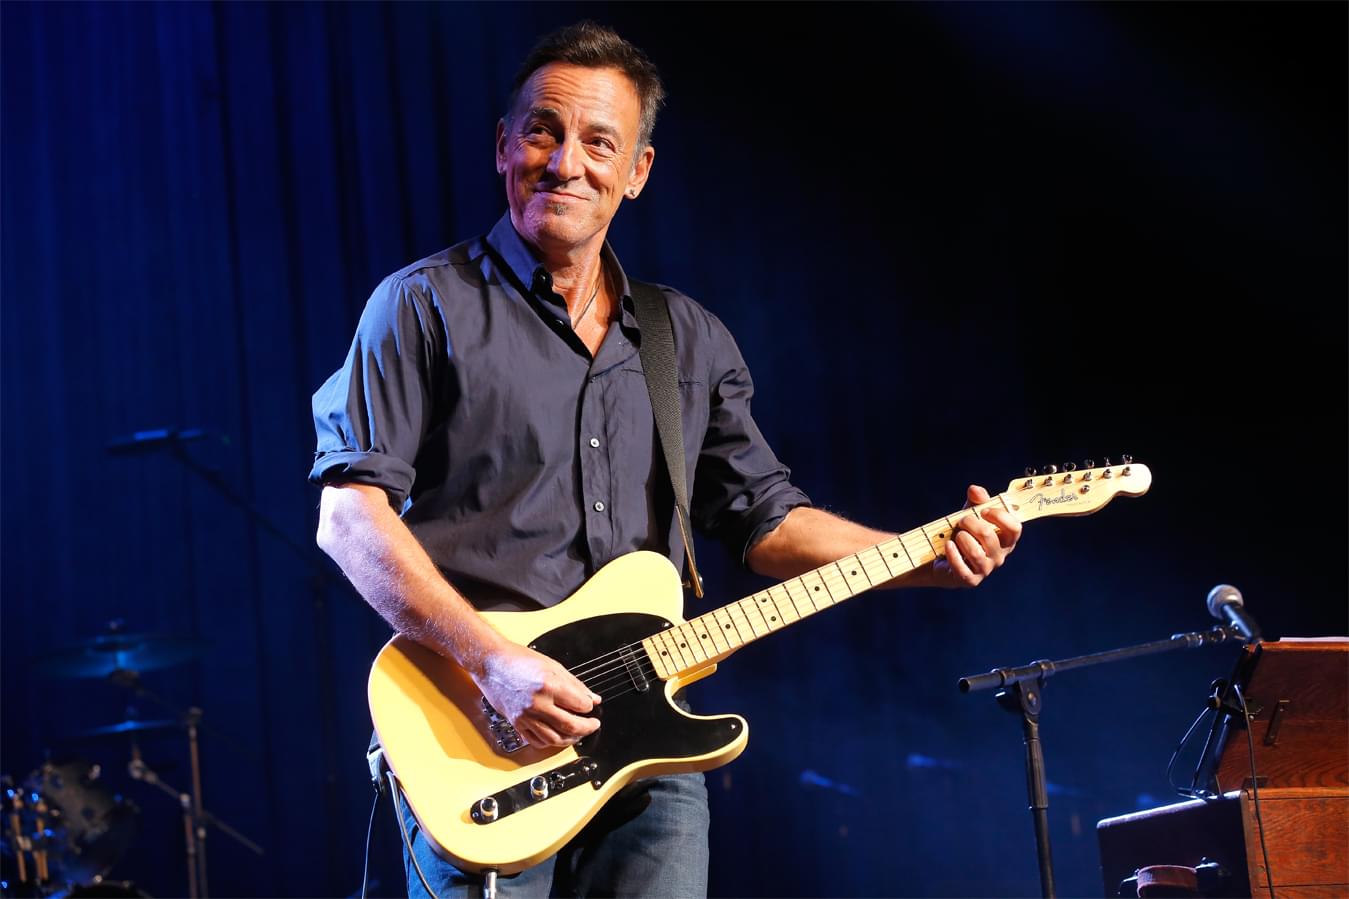 Bruce Springsteen tops Rolling Stone’s ‘Highest Paid Musicians’ list